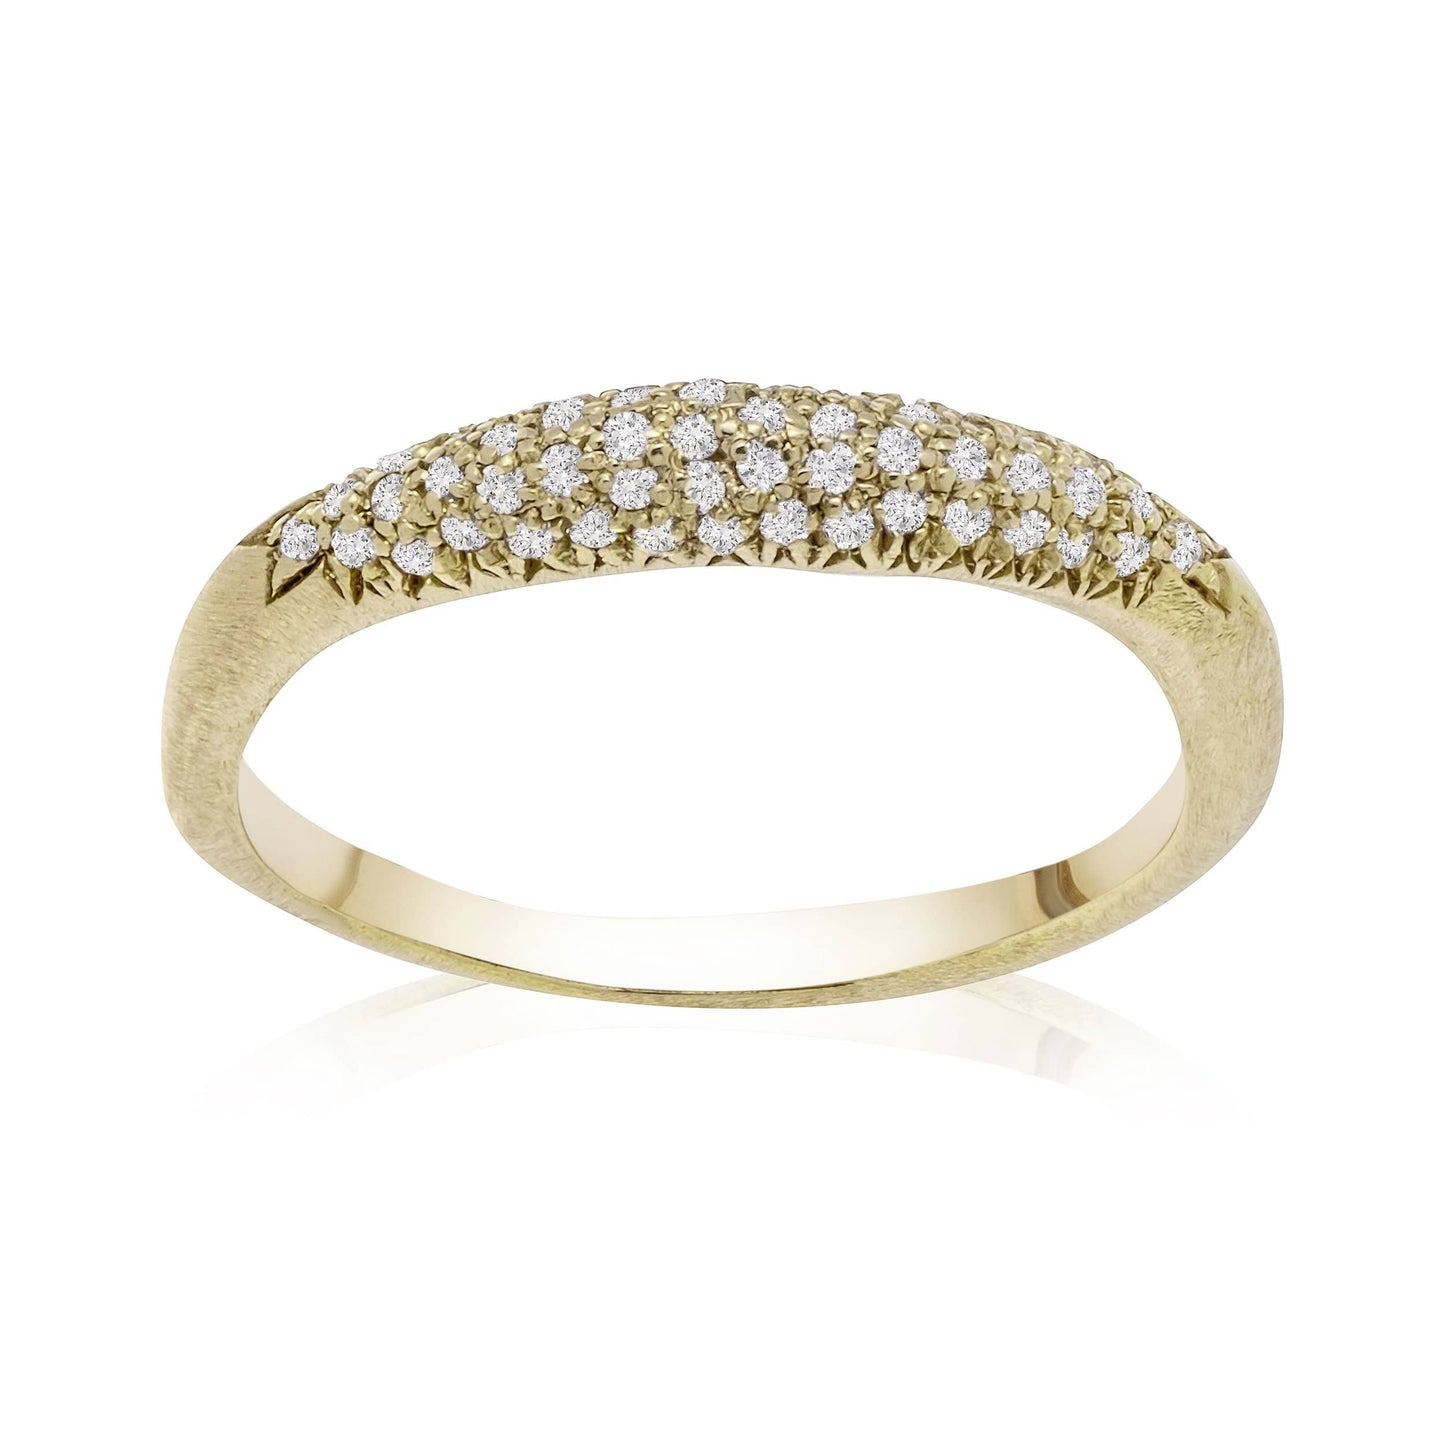 Dalia T Online Ring Signature Collection 14KT YG Diamond Pave Ring